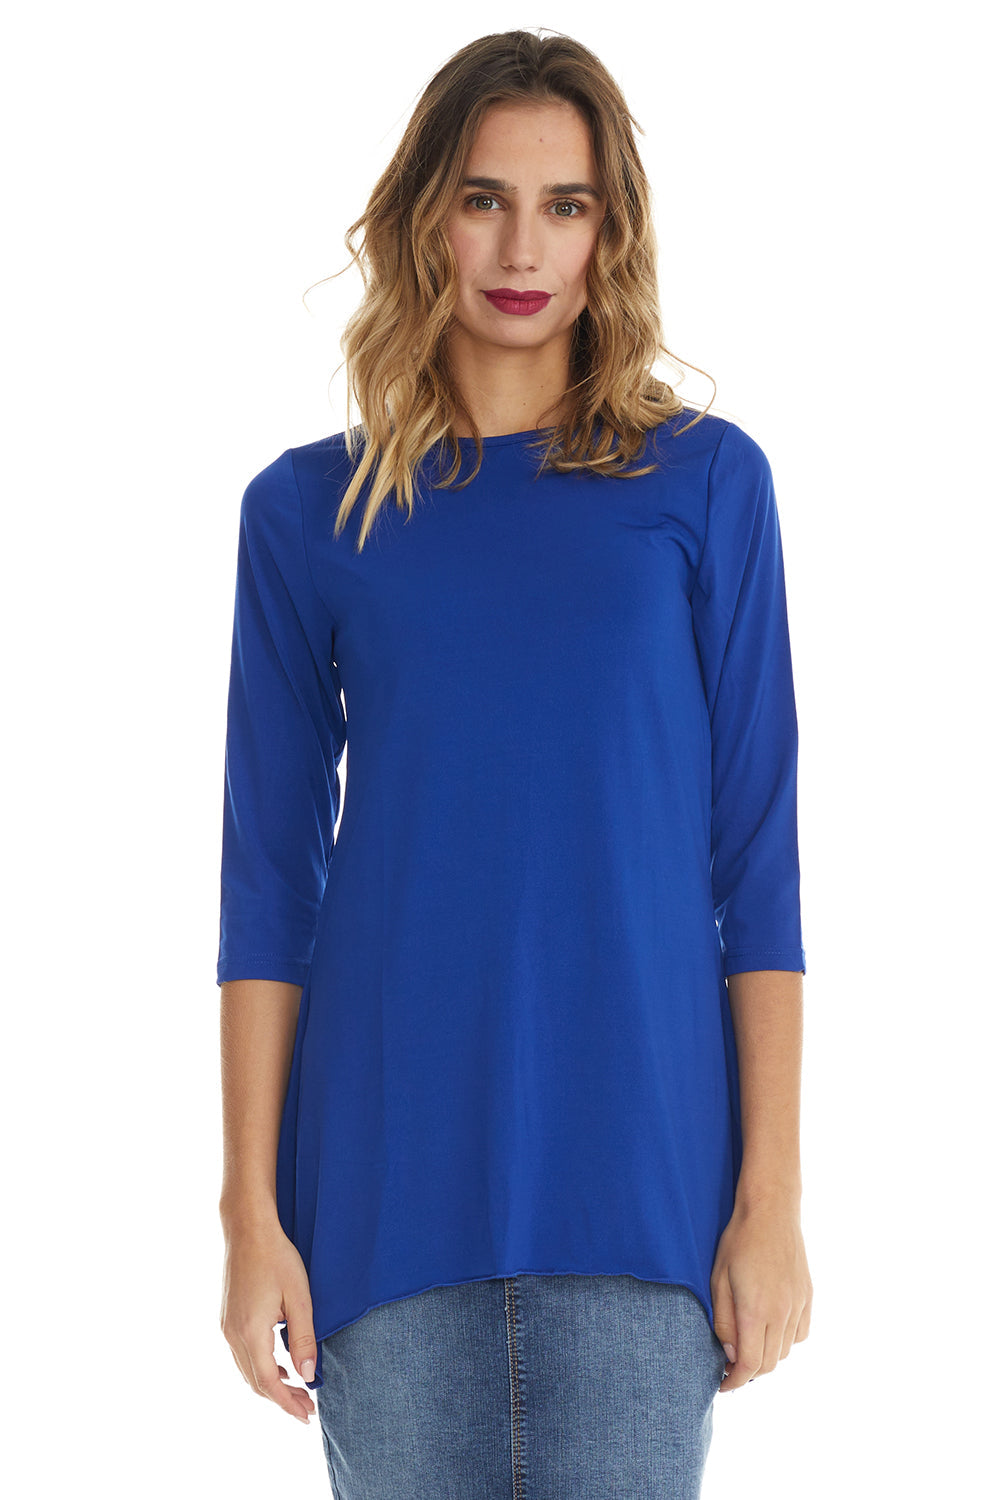 blue silky tunic top to wear with a skirt